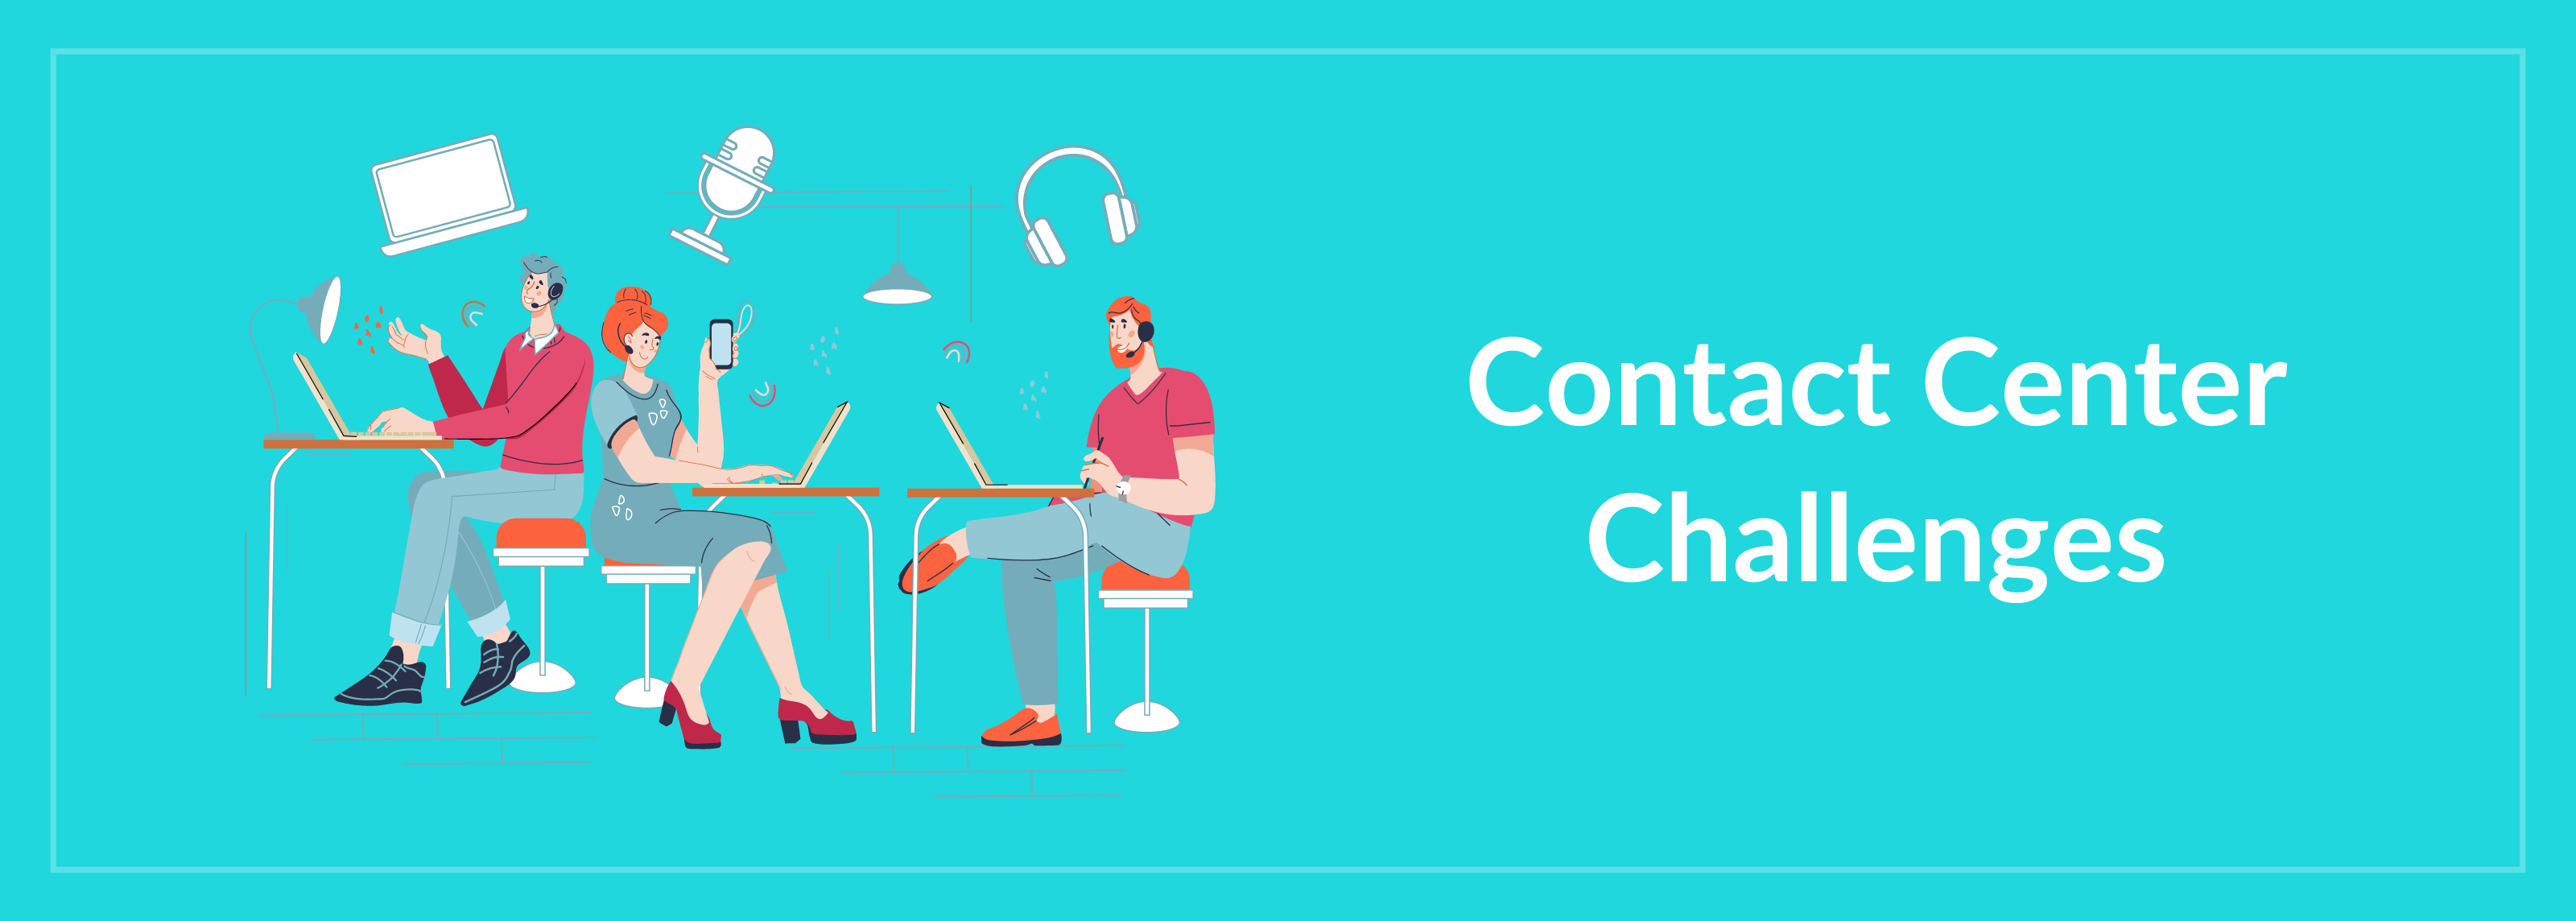 Contact Center Challenges